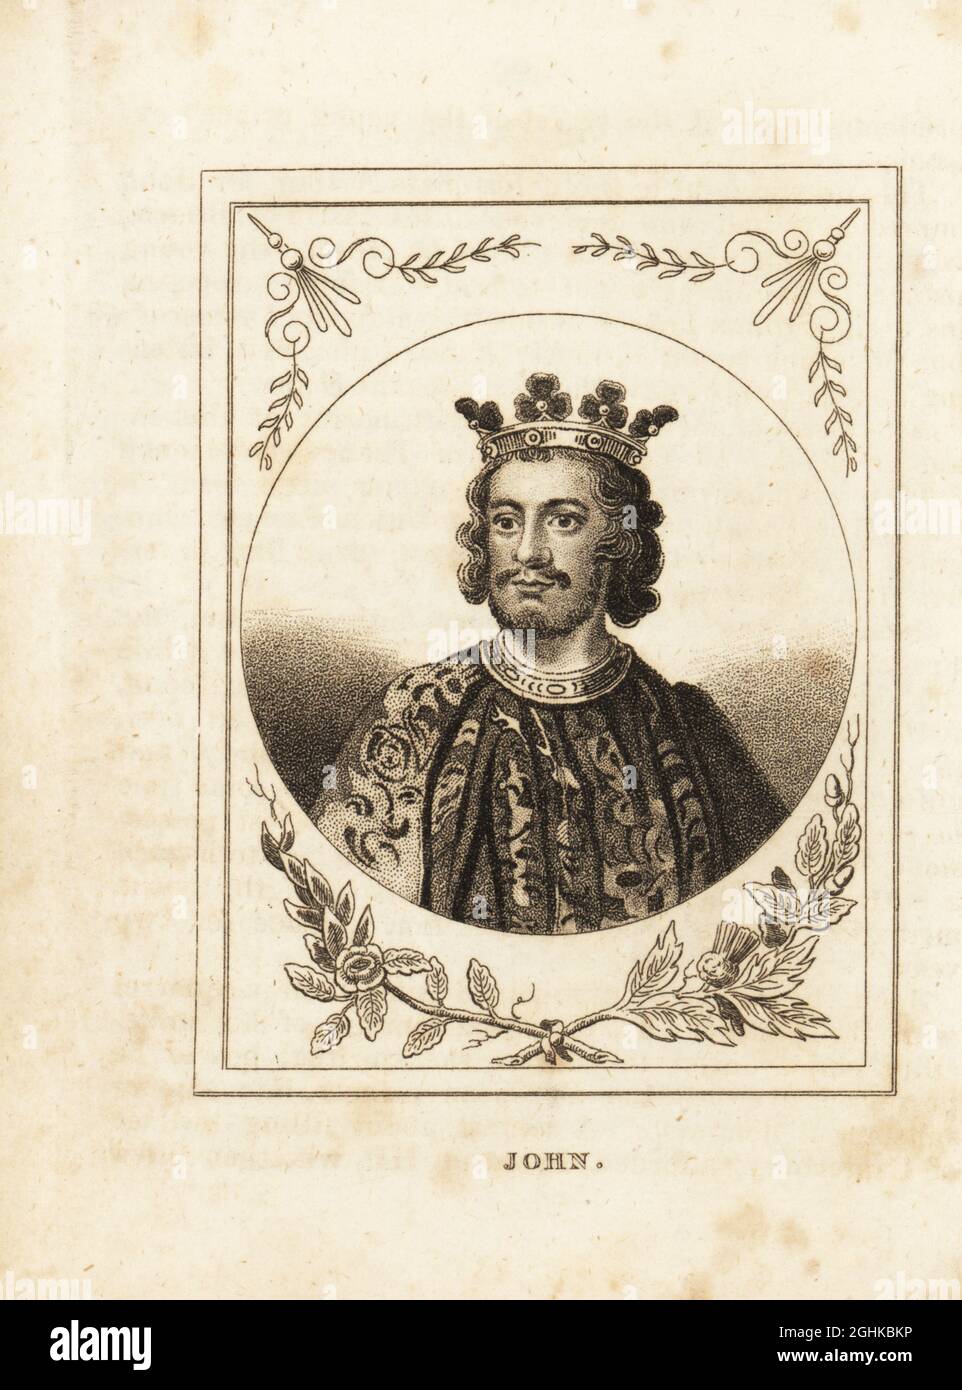 Portrait of King John of England, reigned 1199-1216. In crown, collar and armorial robe. Copperplate engraving from M. A. Jones’ History of England from Julius Caesar to George IV, G. Virtue, 26 Ivy Lane, London, 1836. Stock Photo